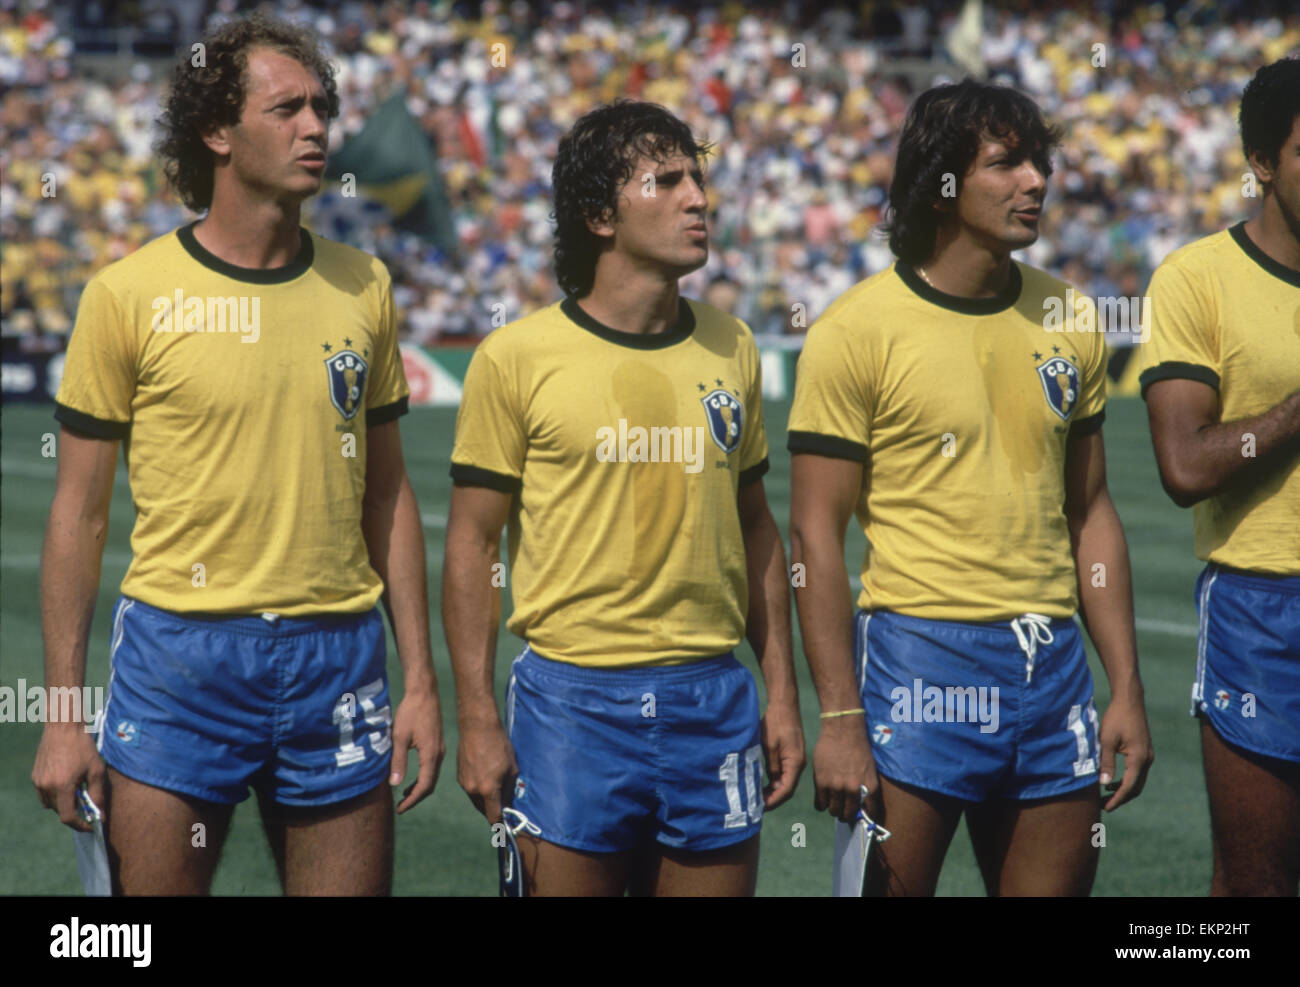 1982 World Cup Second Round Group C match in Barcelona, Spain. Italy 3 v Brazil 2. Brazilians Falcao, Zico and Eder line up befoer the match. 5th July 1982. Stock Photo